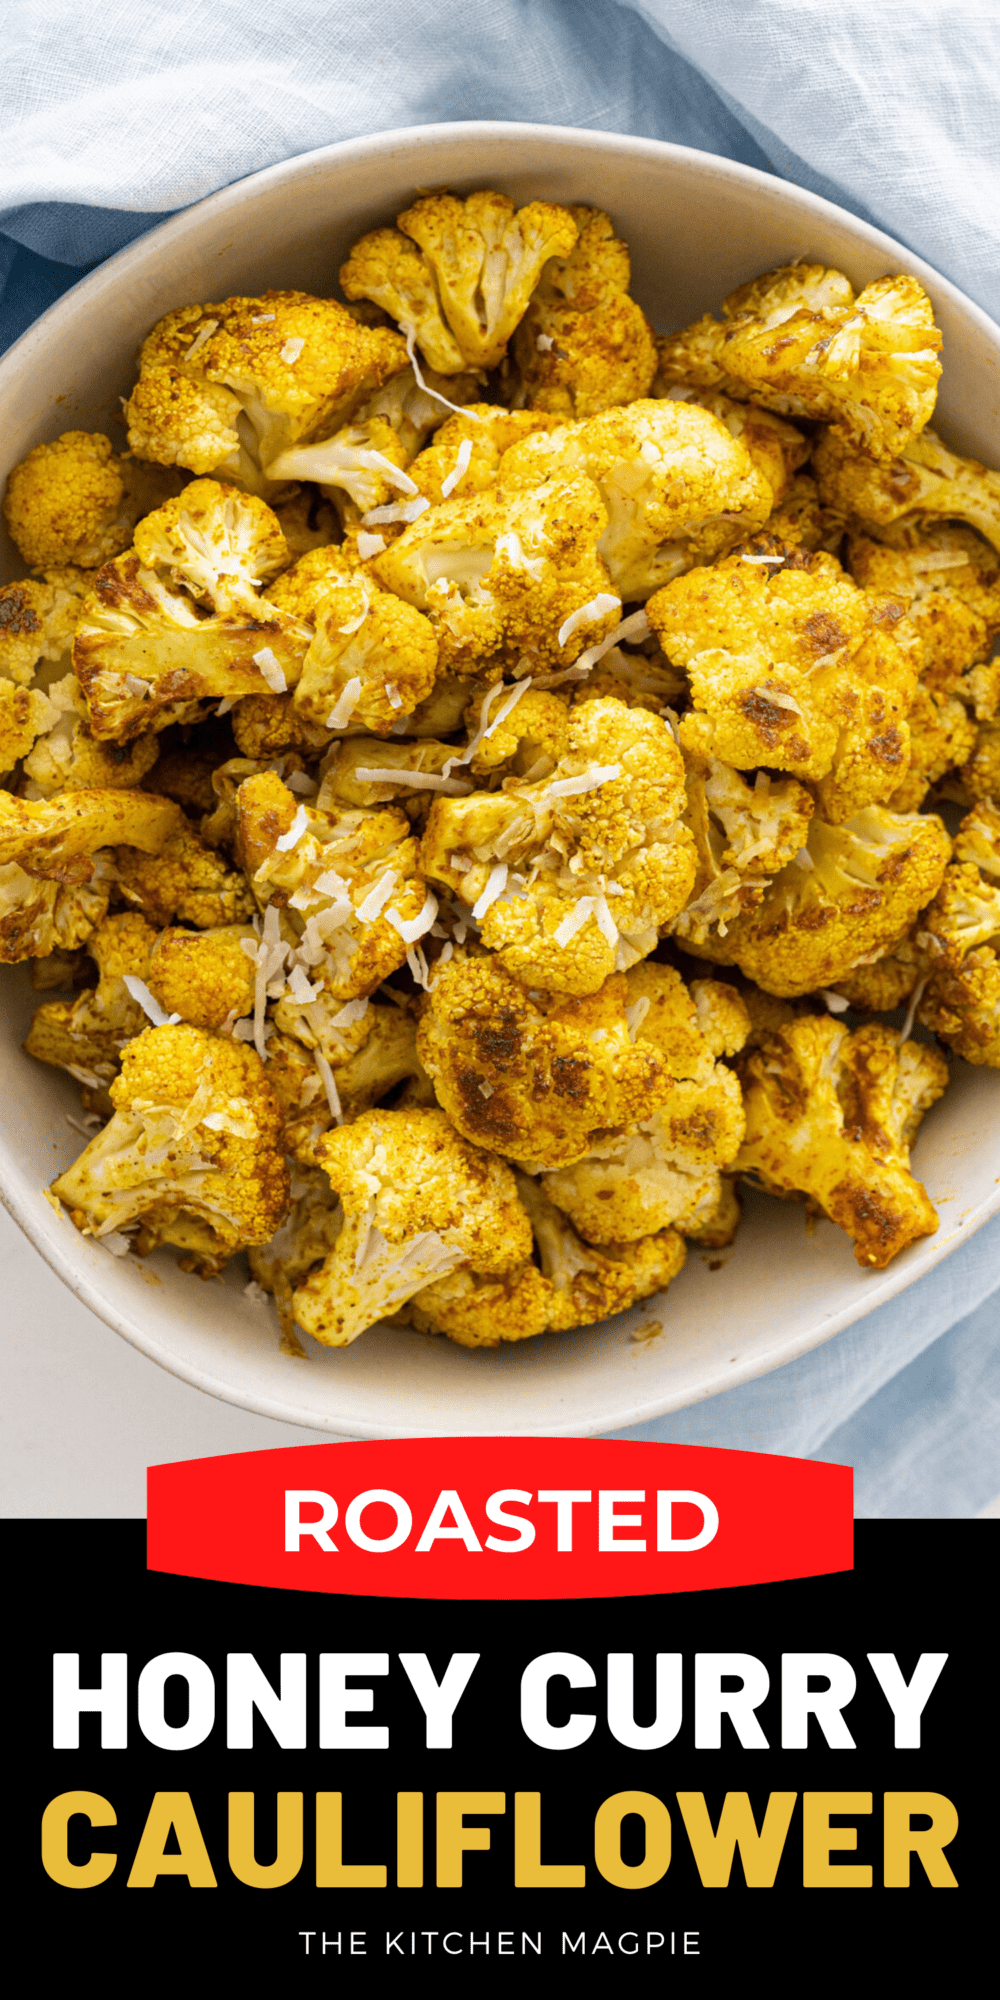 Sweet and savory honey & curry roasted cauliflower, the yummiest way to eat your veggies yet!